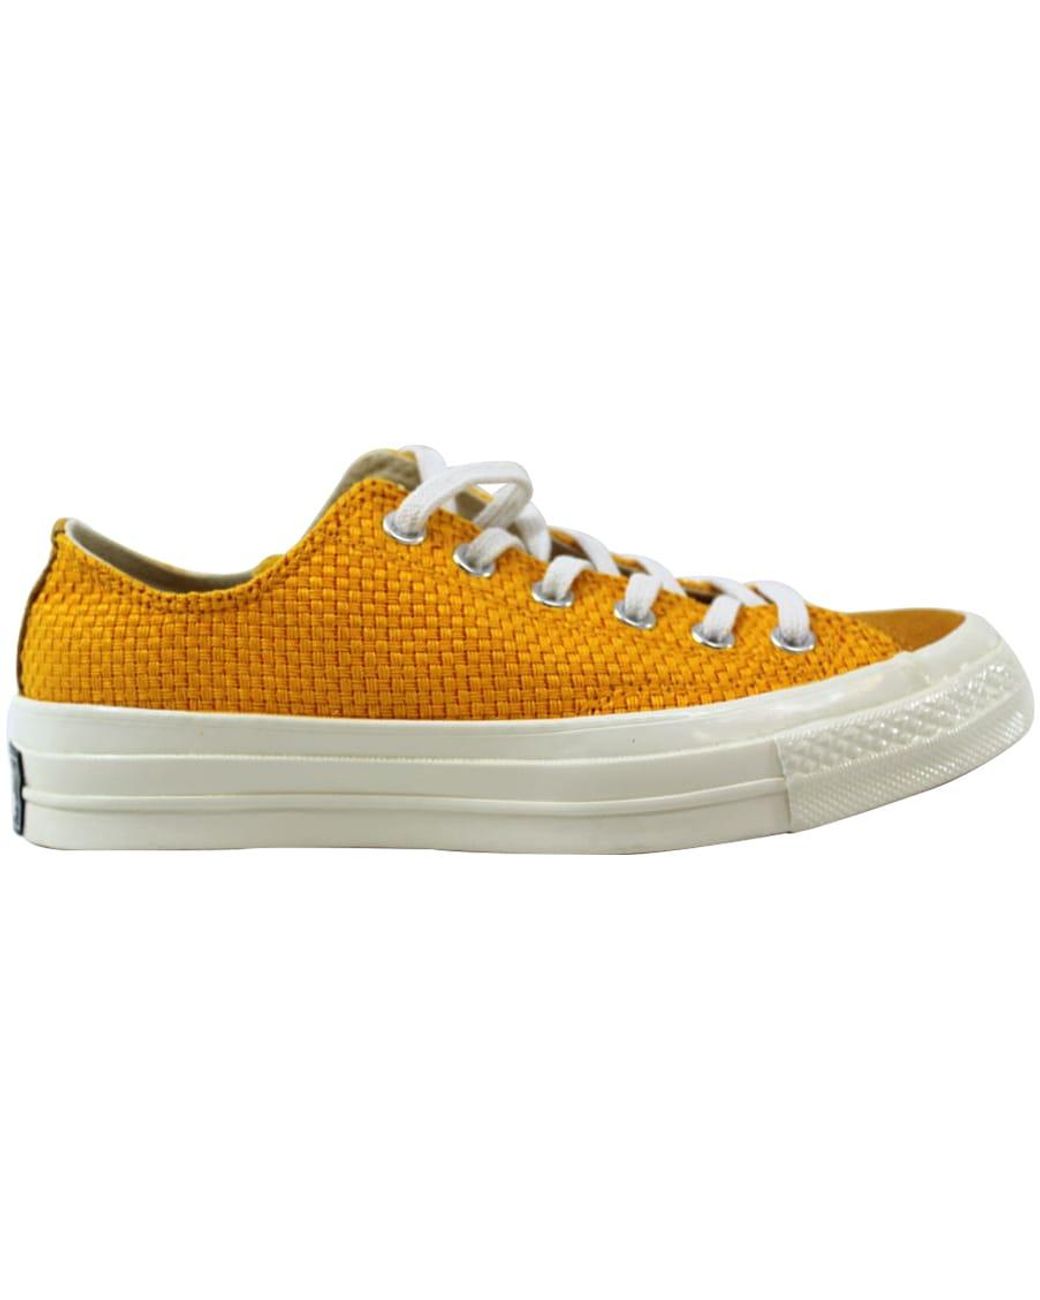 Converse Rubber All Star Ox 70 S in University Gold (Metallic) for Men -  Save 22% - Lyst